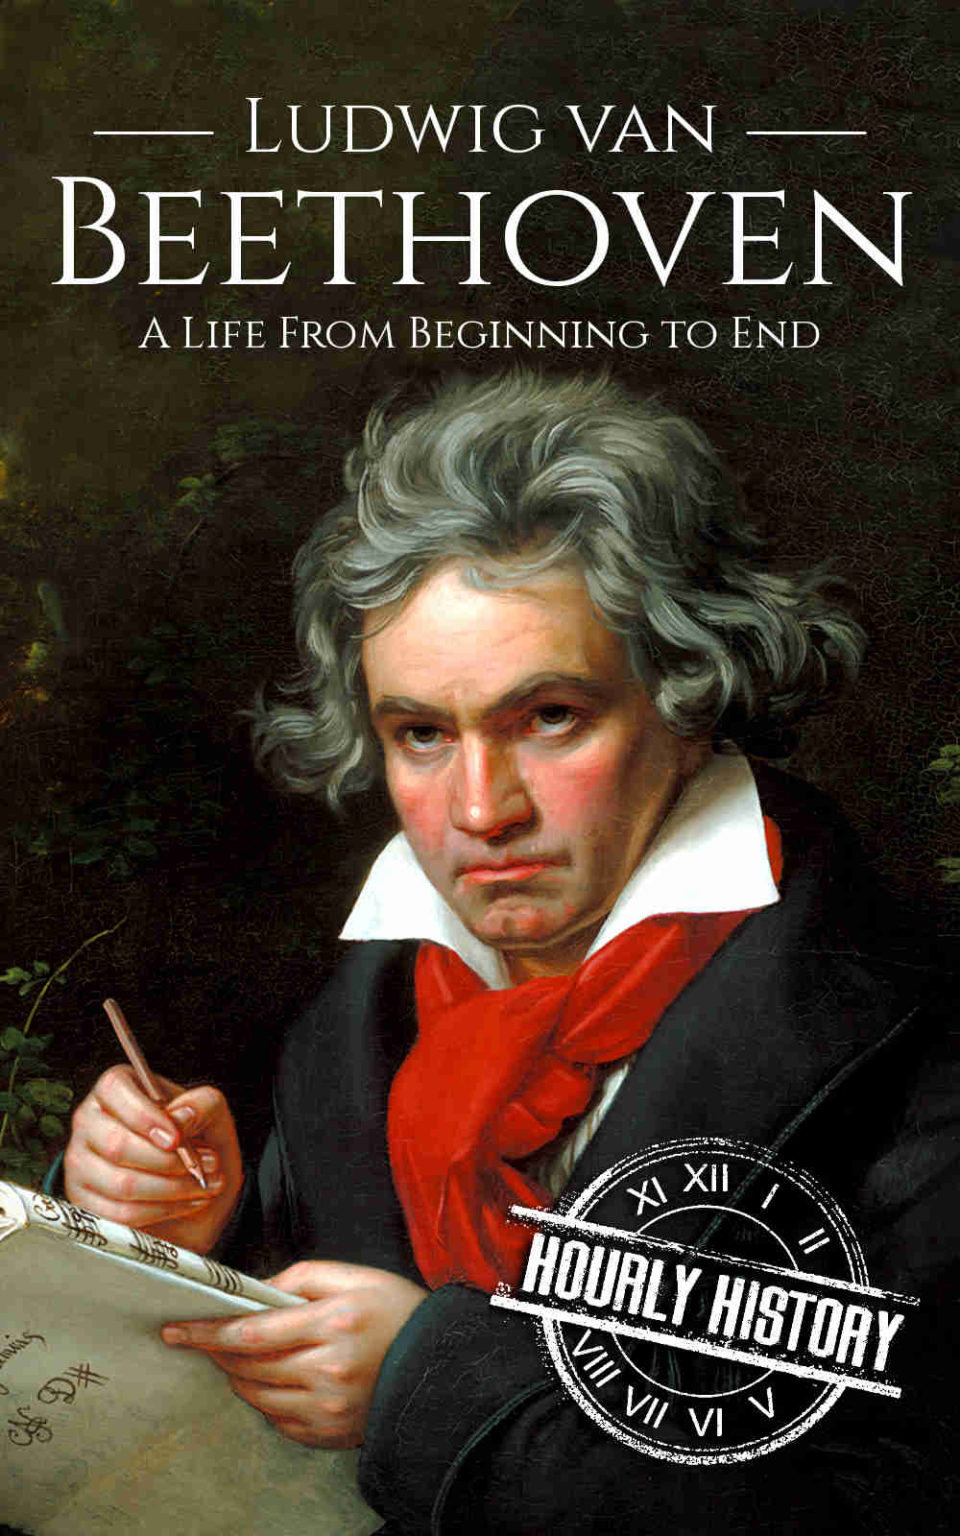 biography of beethoven